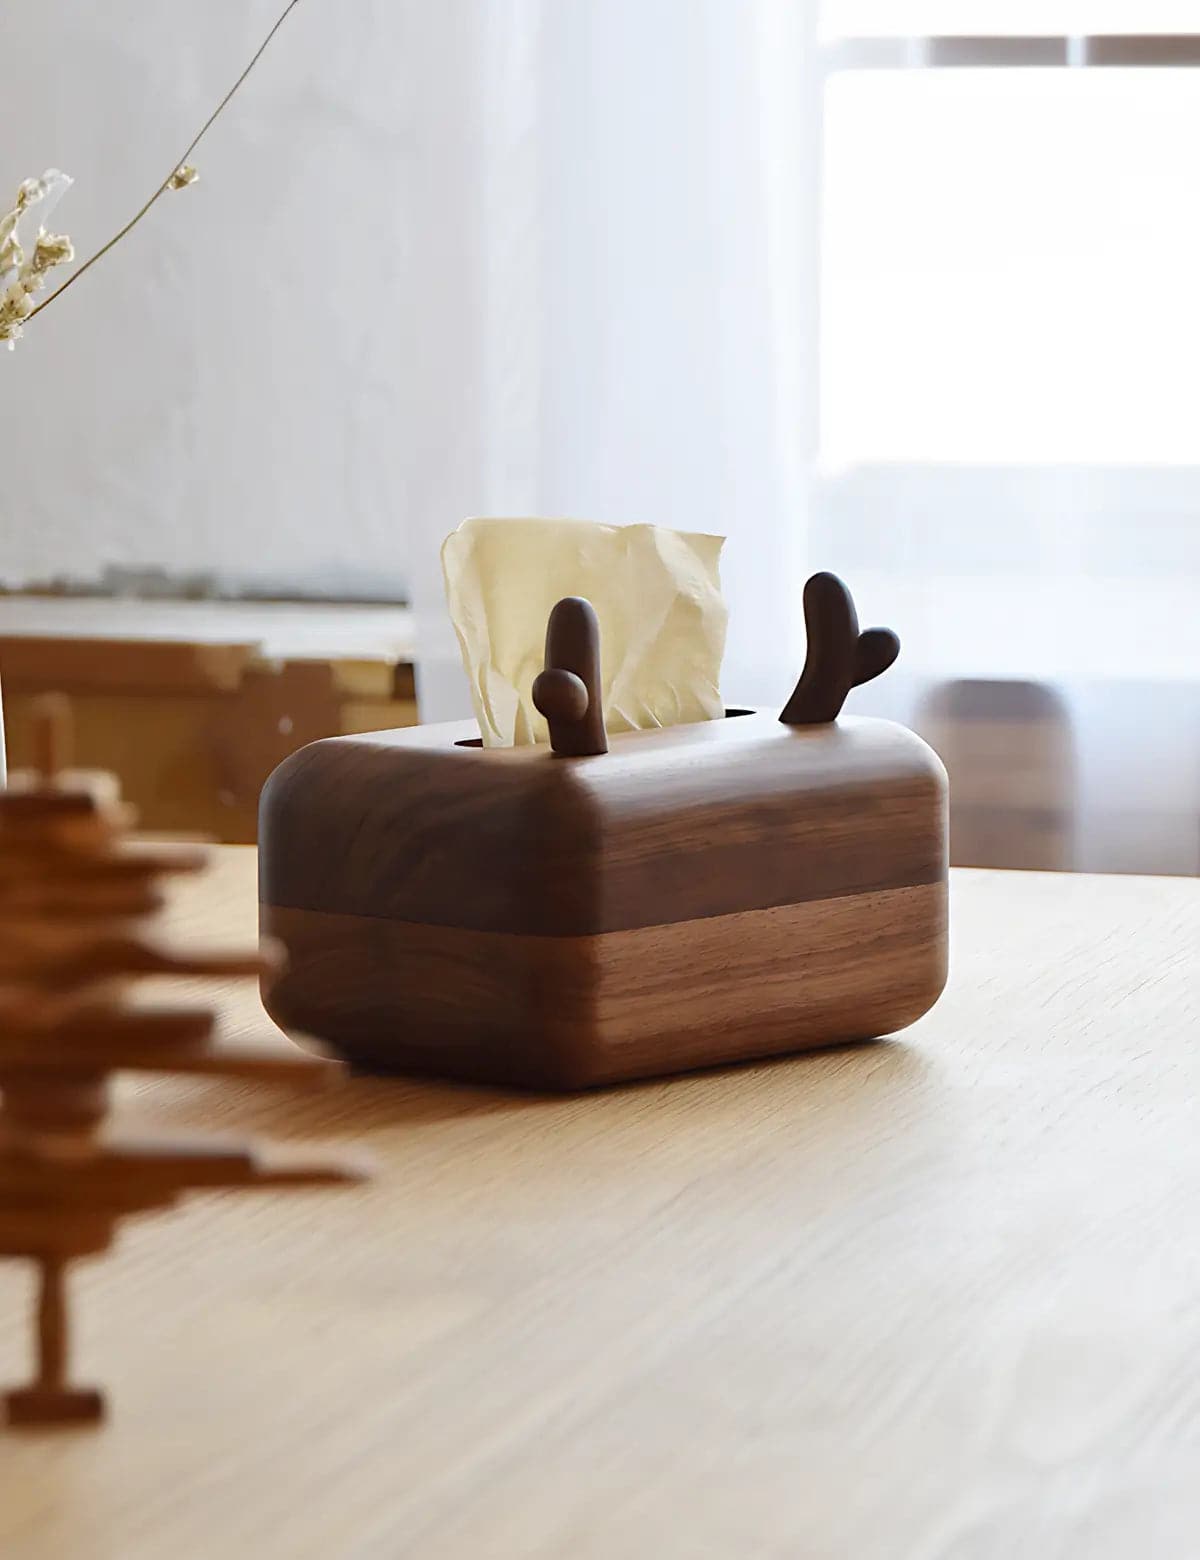 Wooden-Deer-Antler-Tissue-Box-Decorative-Home-Accessory-05